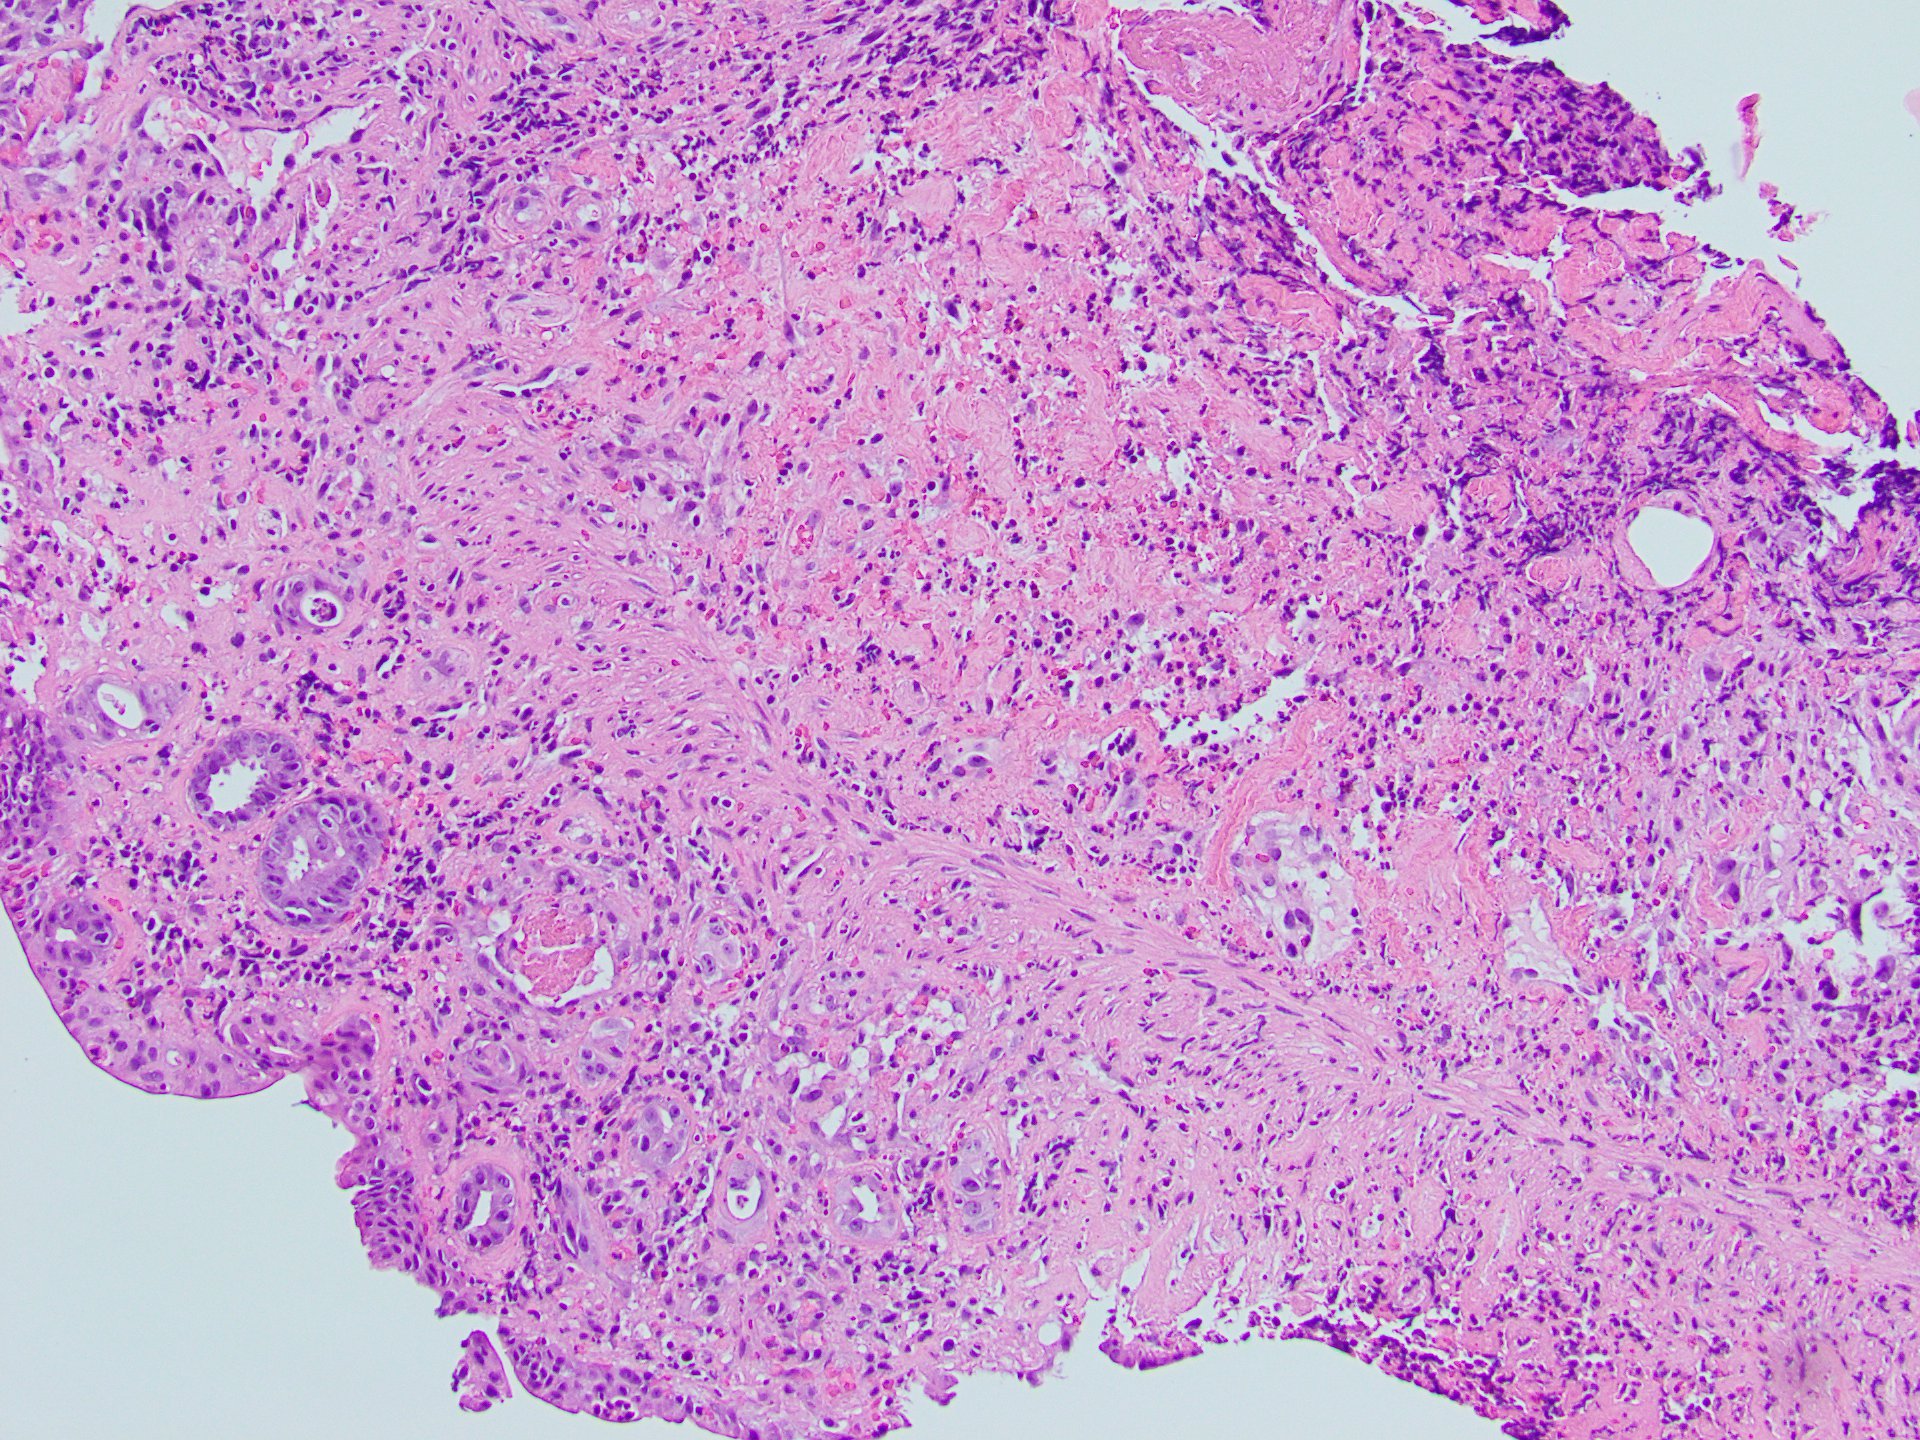 Figure C: H & E stain of colonic biopsy specimen at 20X demonstrating lamina propria hyalinization, crypt atrophy and loss.